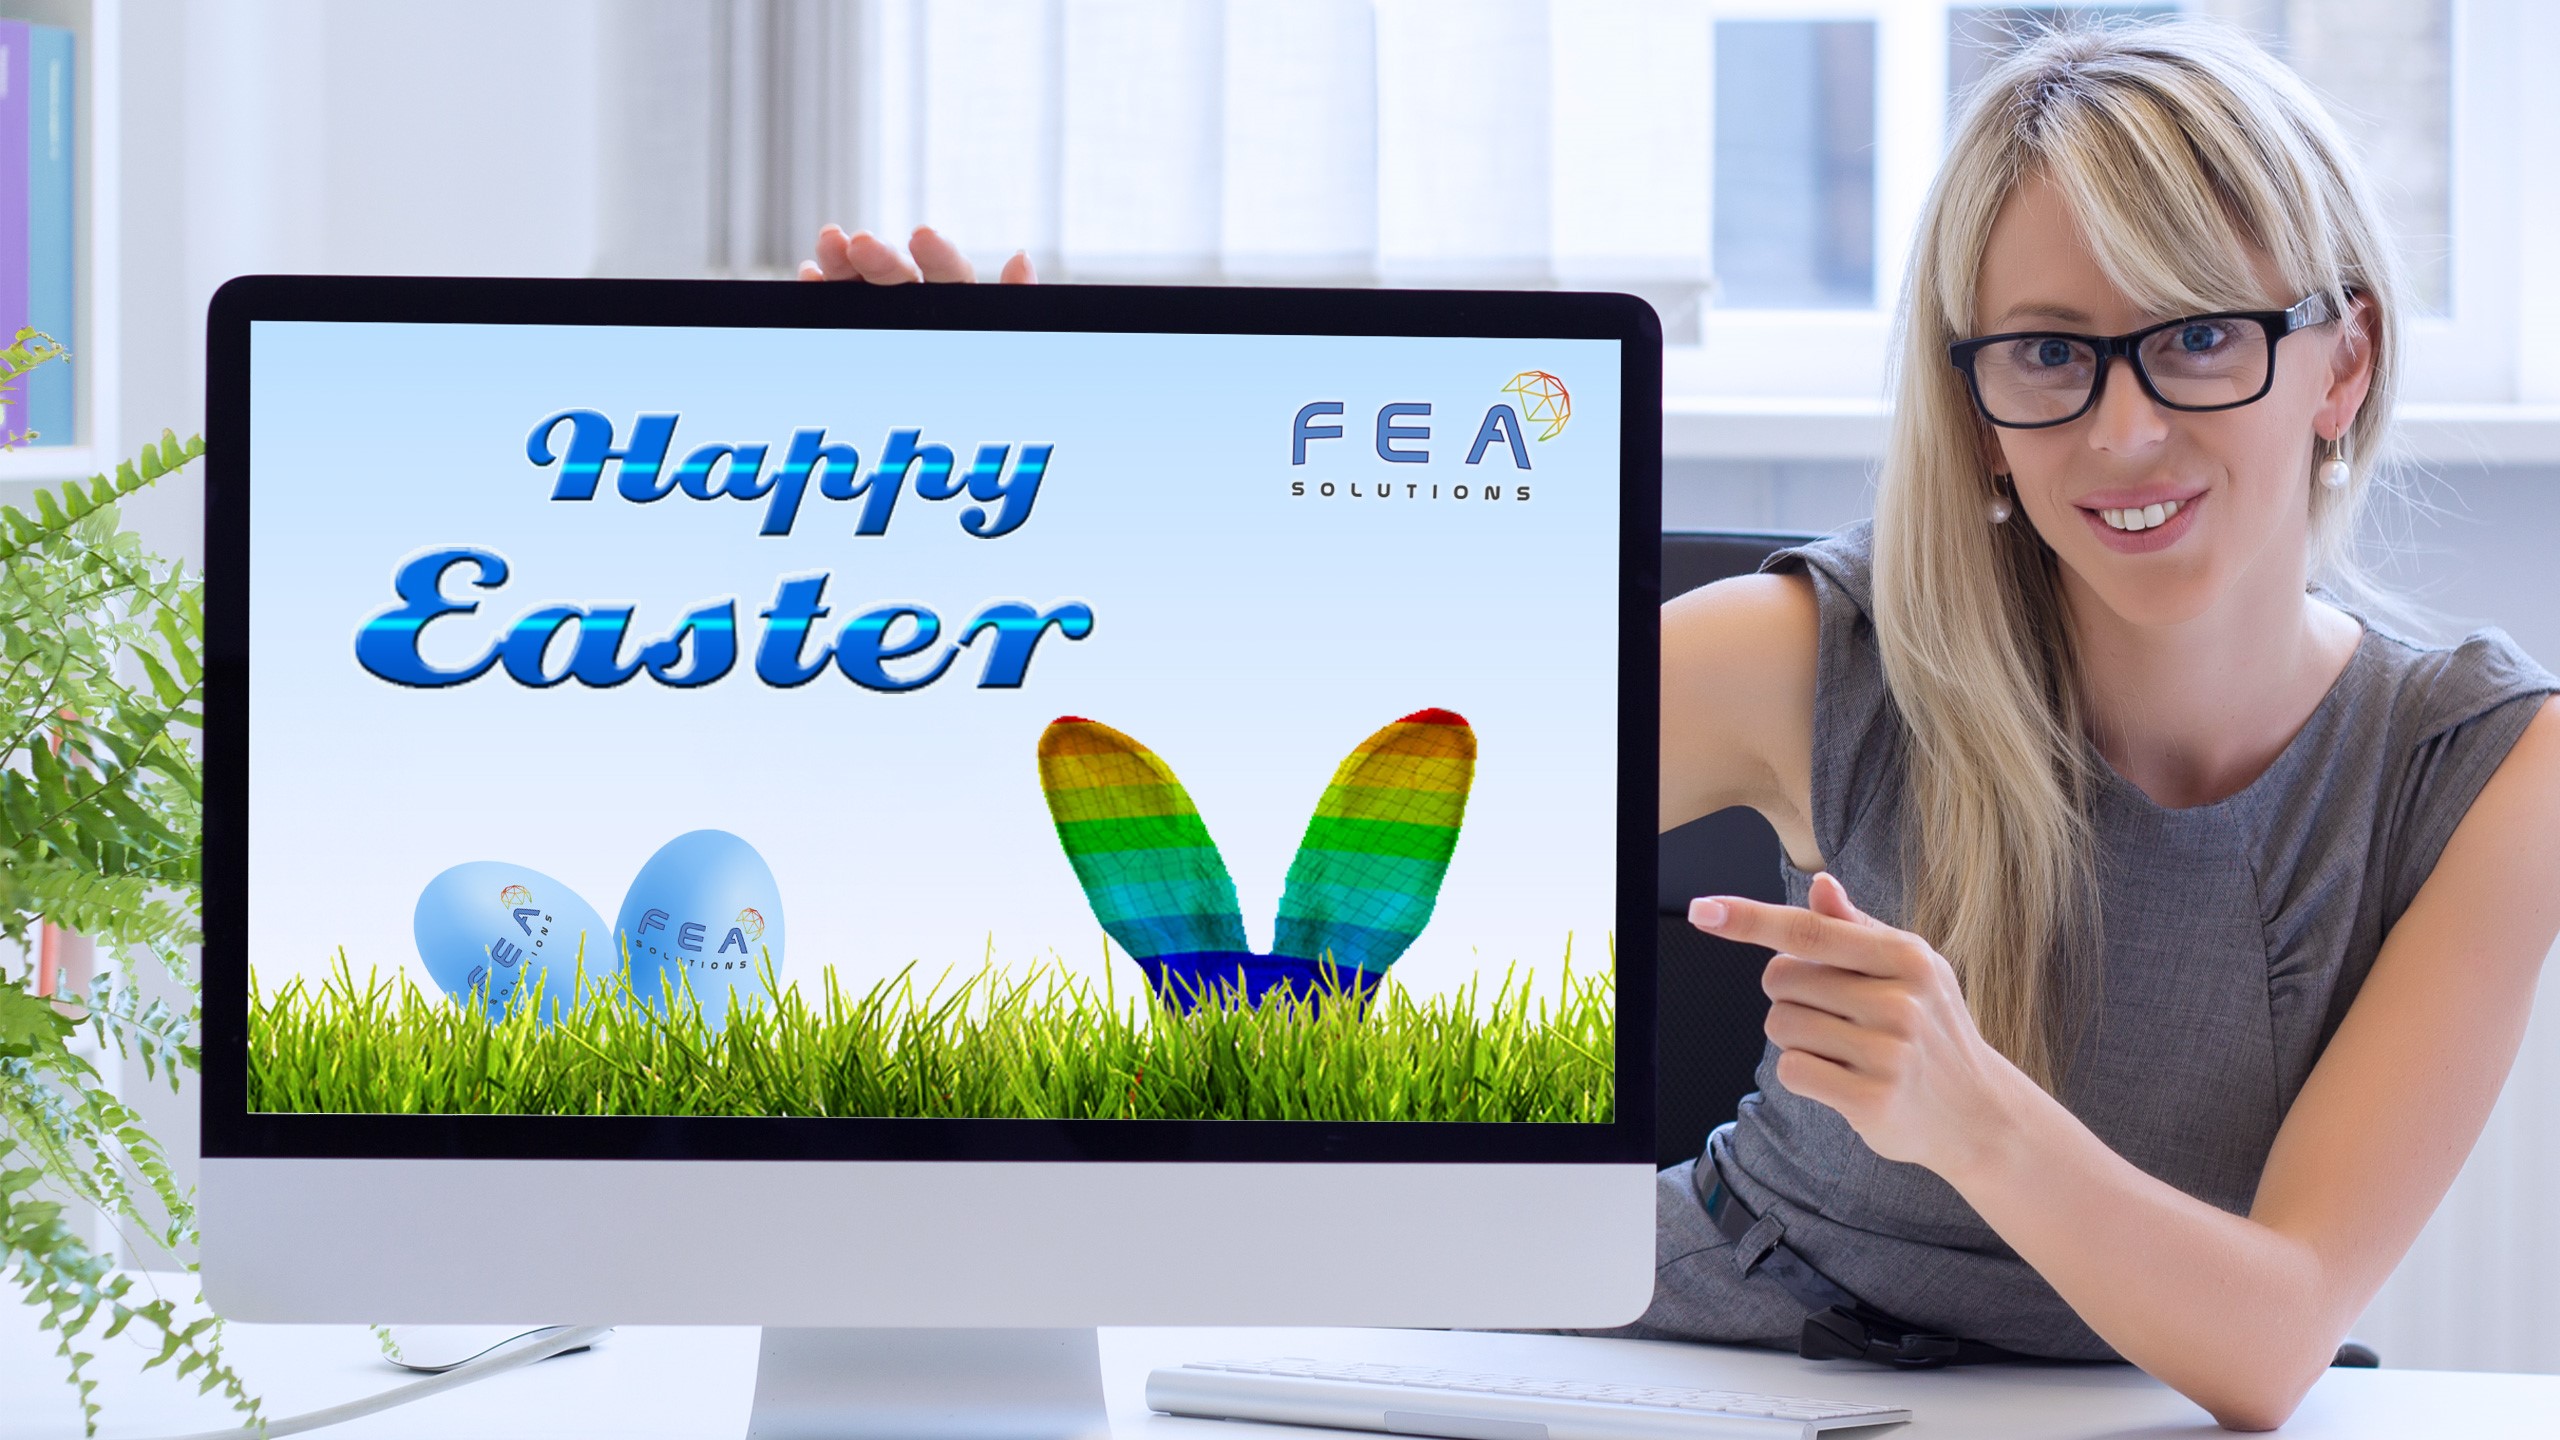 happy easter message from fea solutions 2020